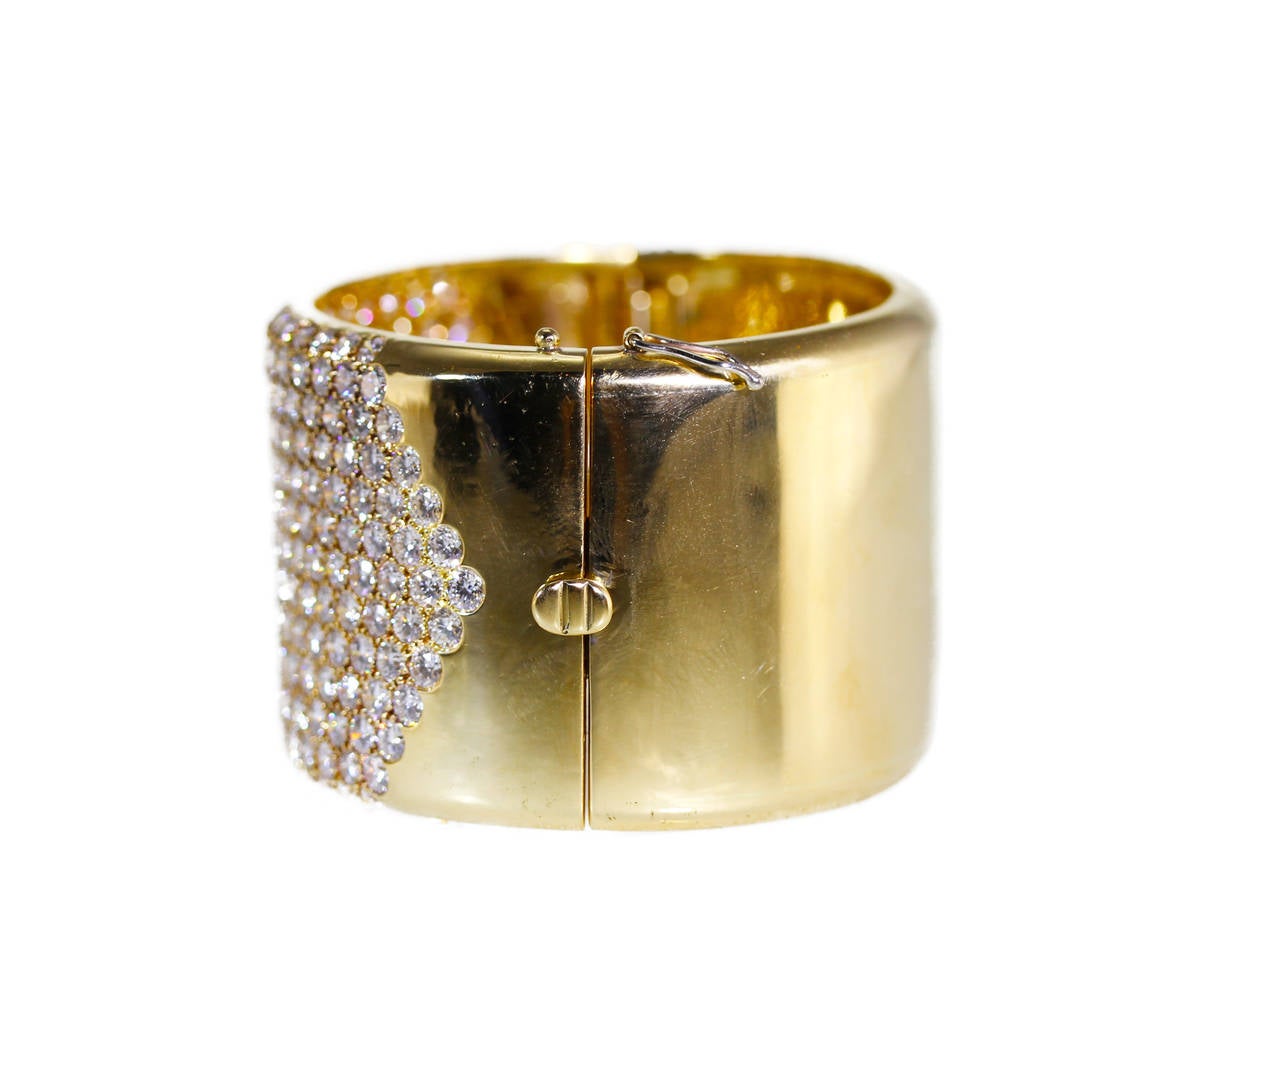 An 18 karat yellow gold cuff bracelet, the wide polished gold cuff set at the front with 257 round diamonds of excellent quality and match weighing approximately 36.00 carats, gross weight 104.7 grams, length 6 3/4 inches, width 1 3/8 inches,